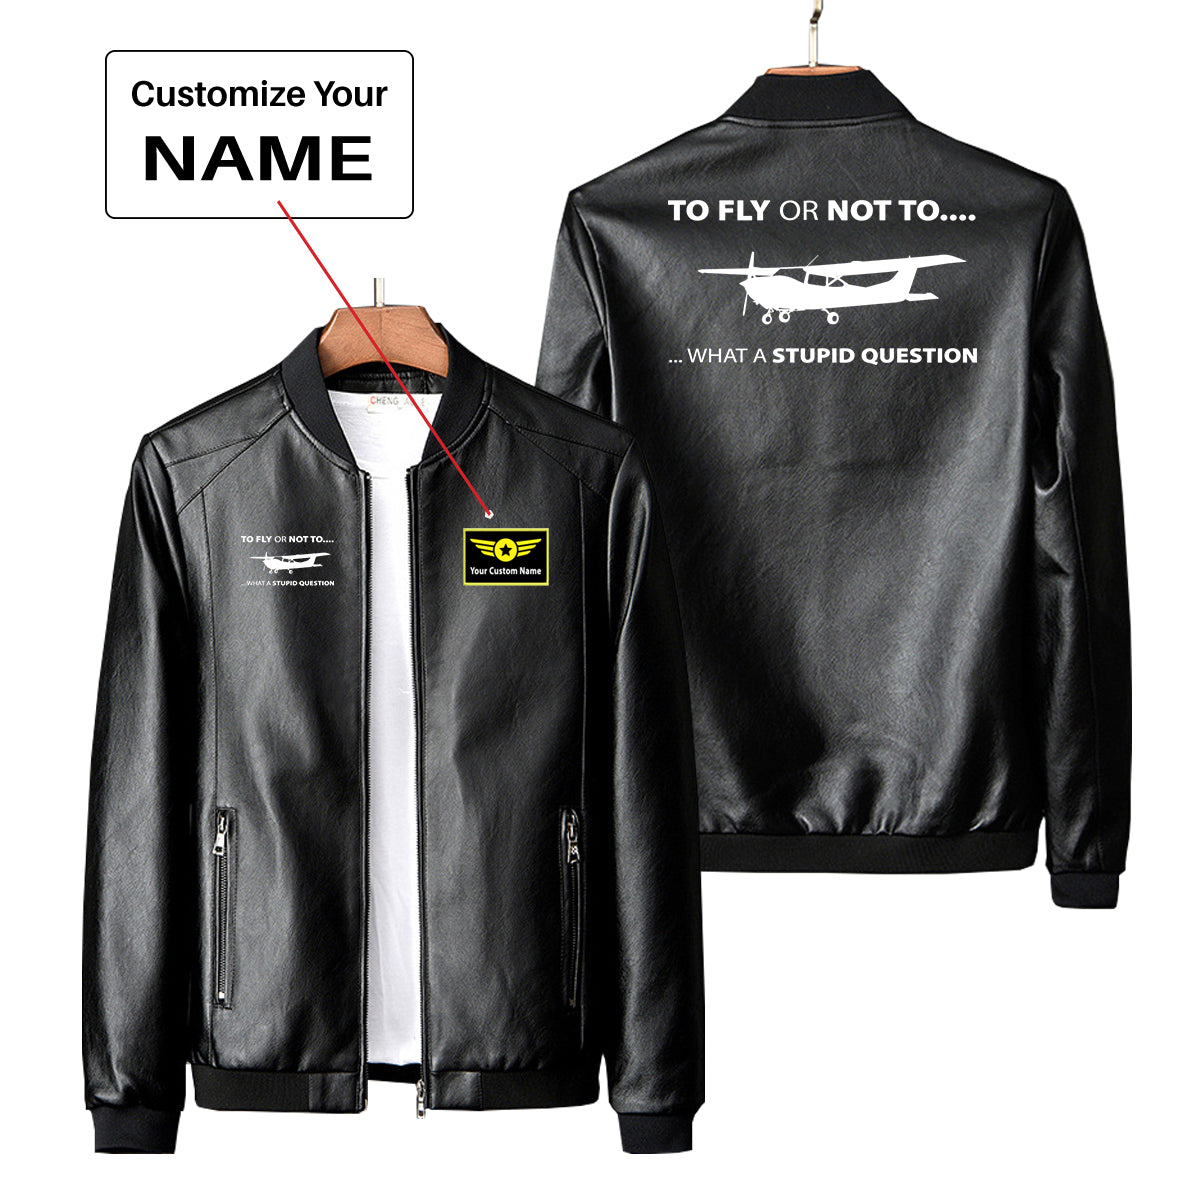 To Fly or Not To What a Stupid Question Designed PU Leather Jackets